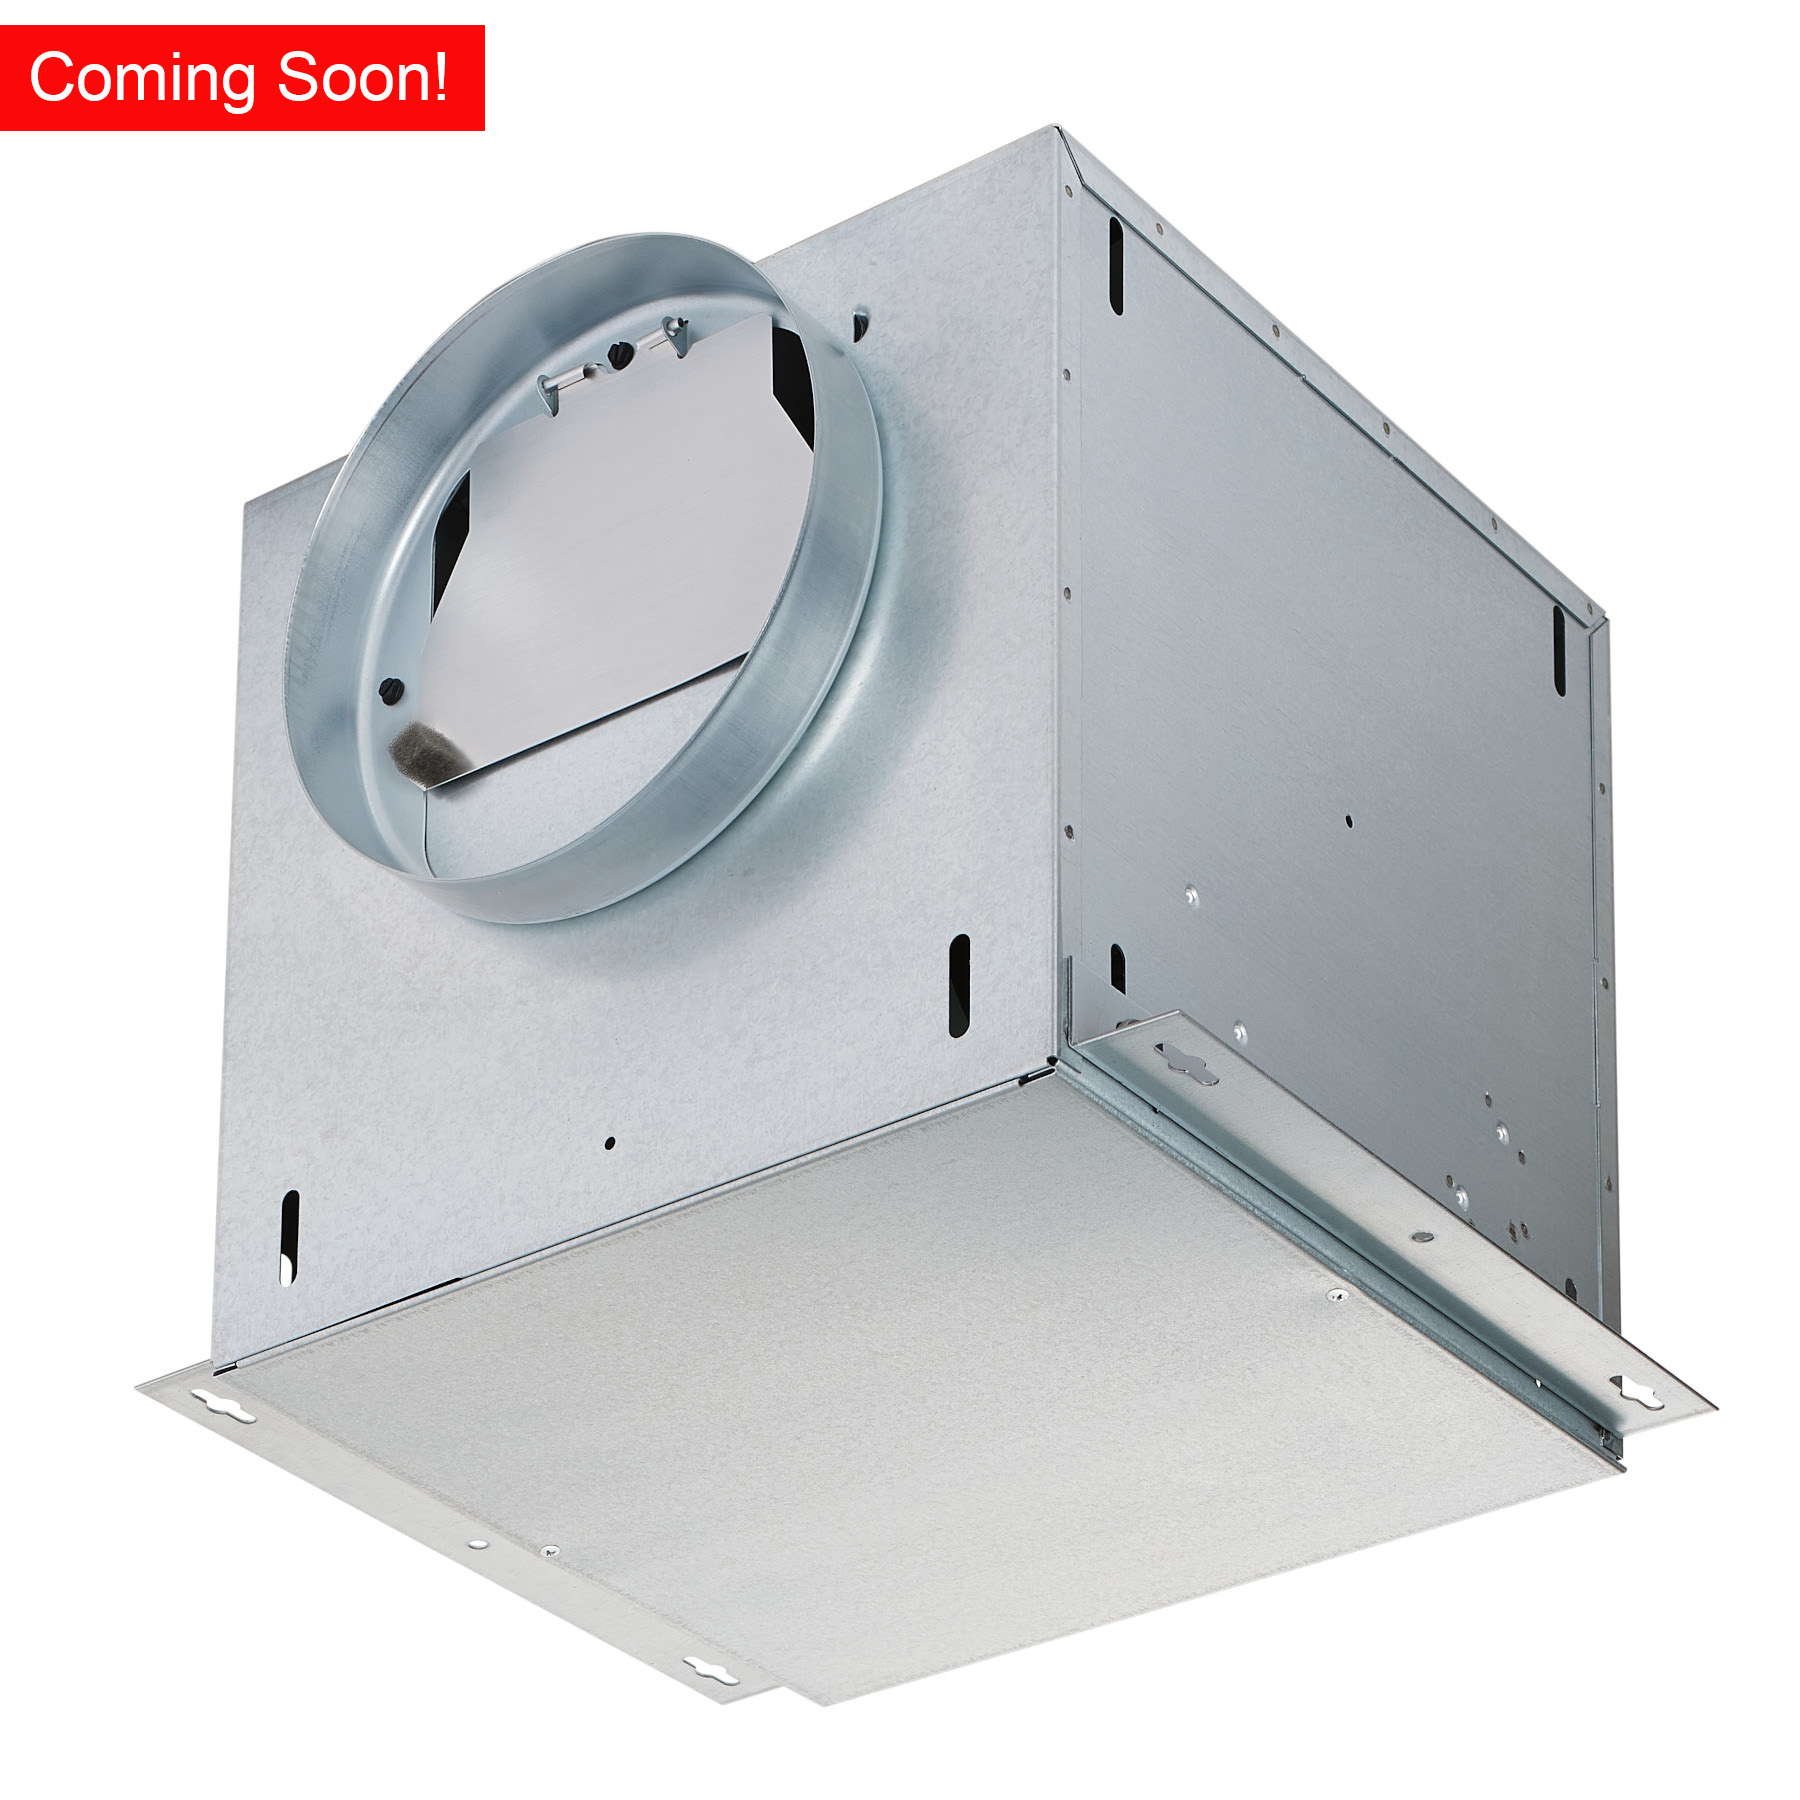 High-Capacity, Light Commercial 233 CFM InLine Ventilation Fan, ENERGY STAR® certified